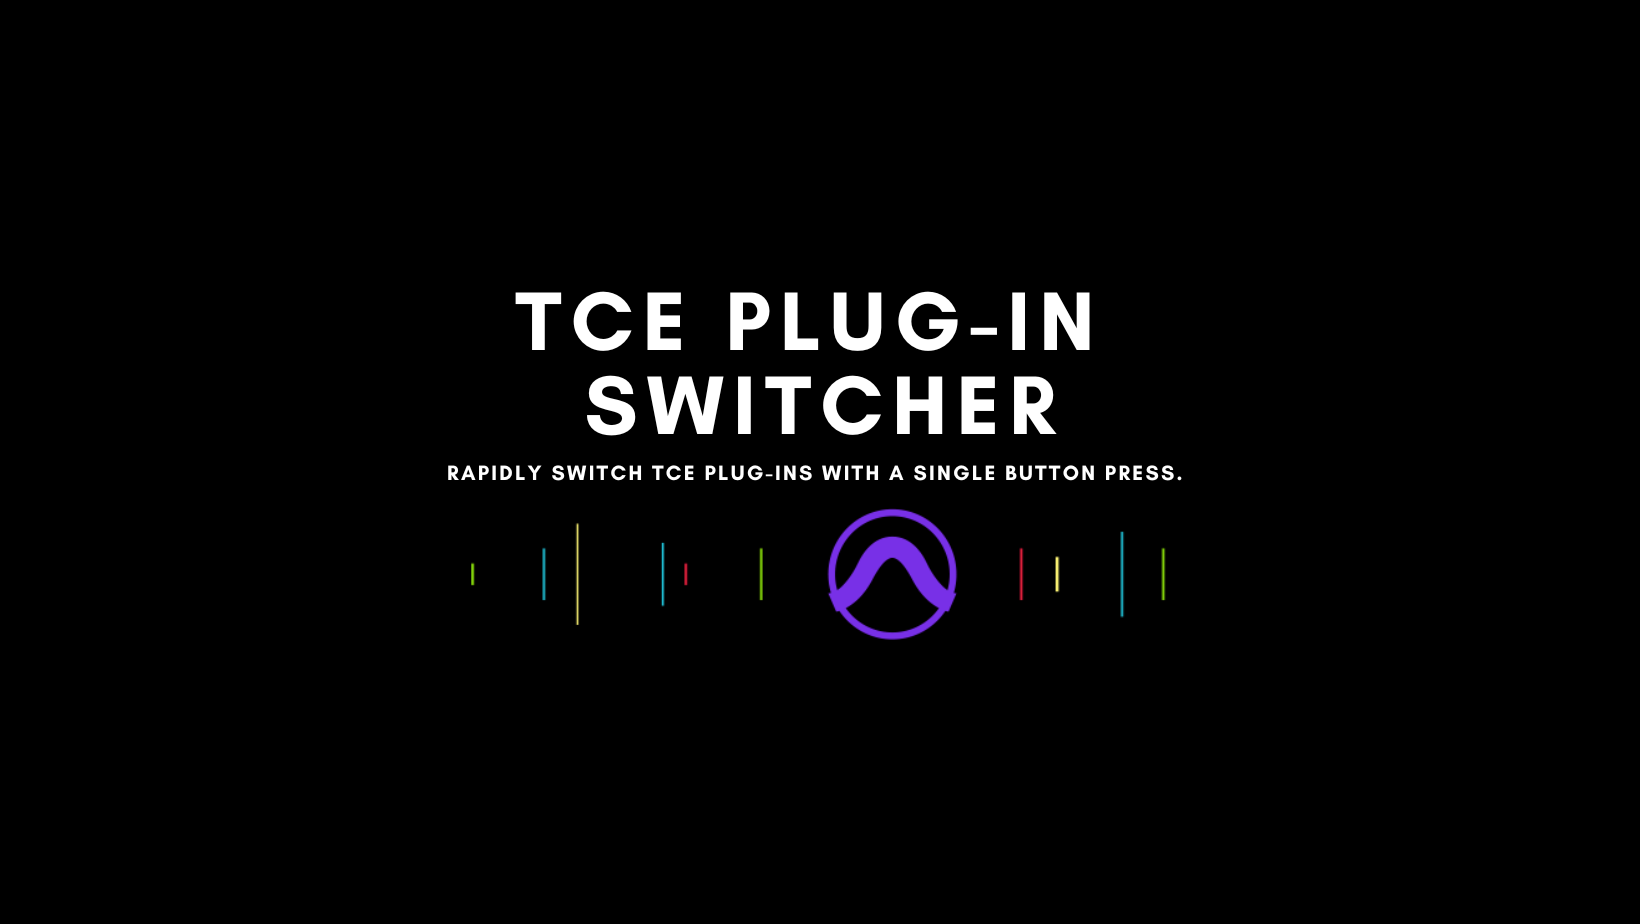 TCE Plug-In Switcher